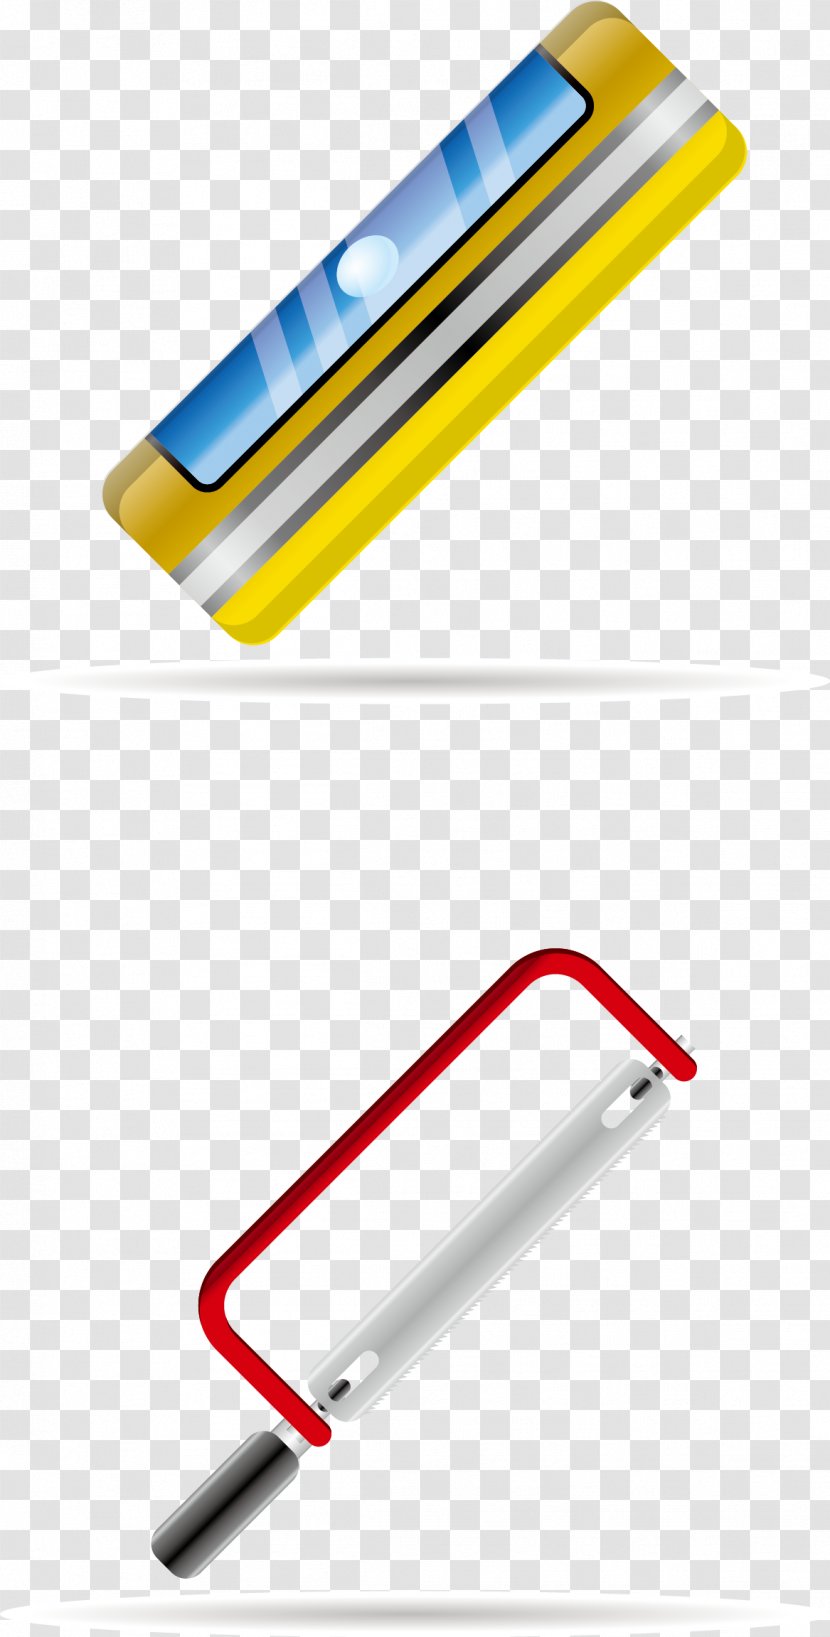 Architectural Engineering Tool - Yellow - Hand Drawn Vector Construction Tools Transparent PNG